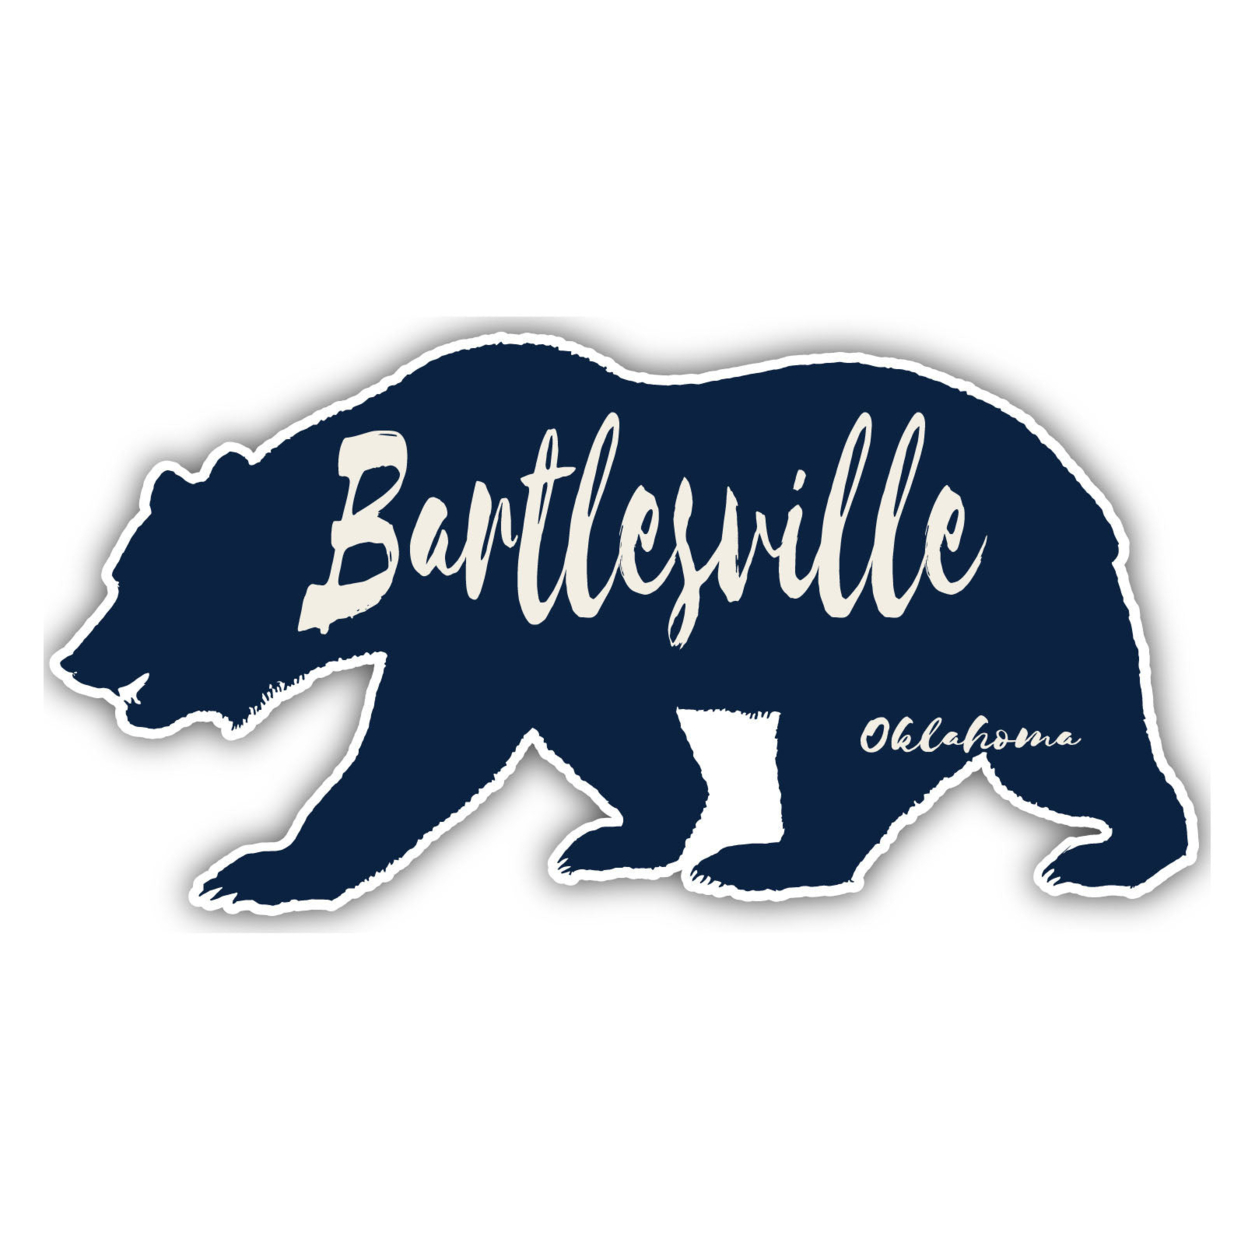 Bartlesville Oklahoma Souvenir Decorative Stickers (Choose Theme And Size) - 4-Pack, 2-Inch, Bear